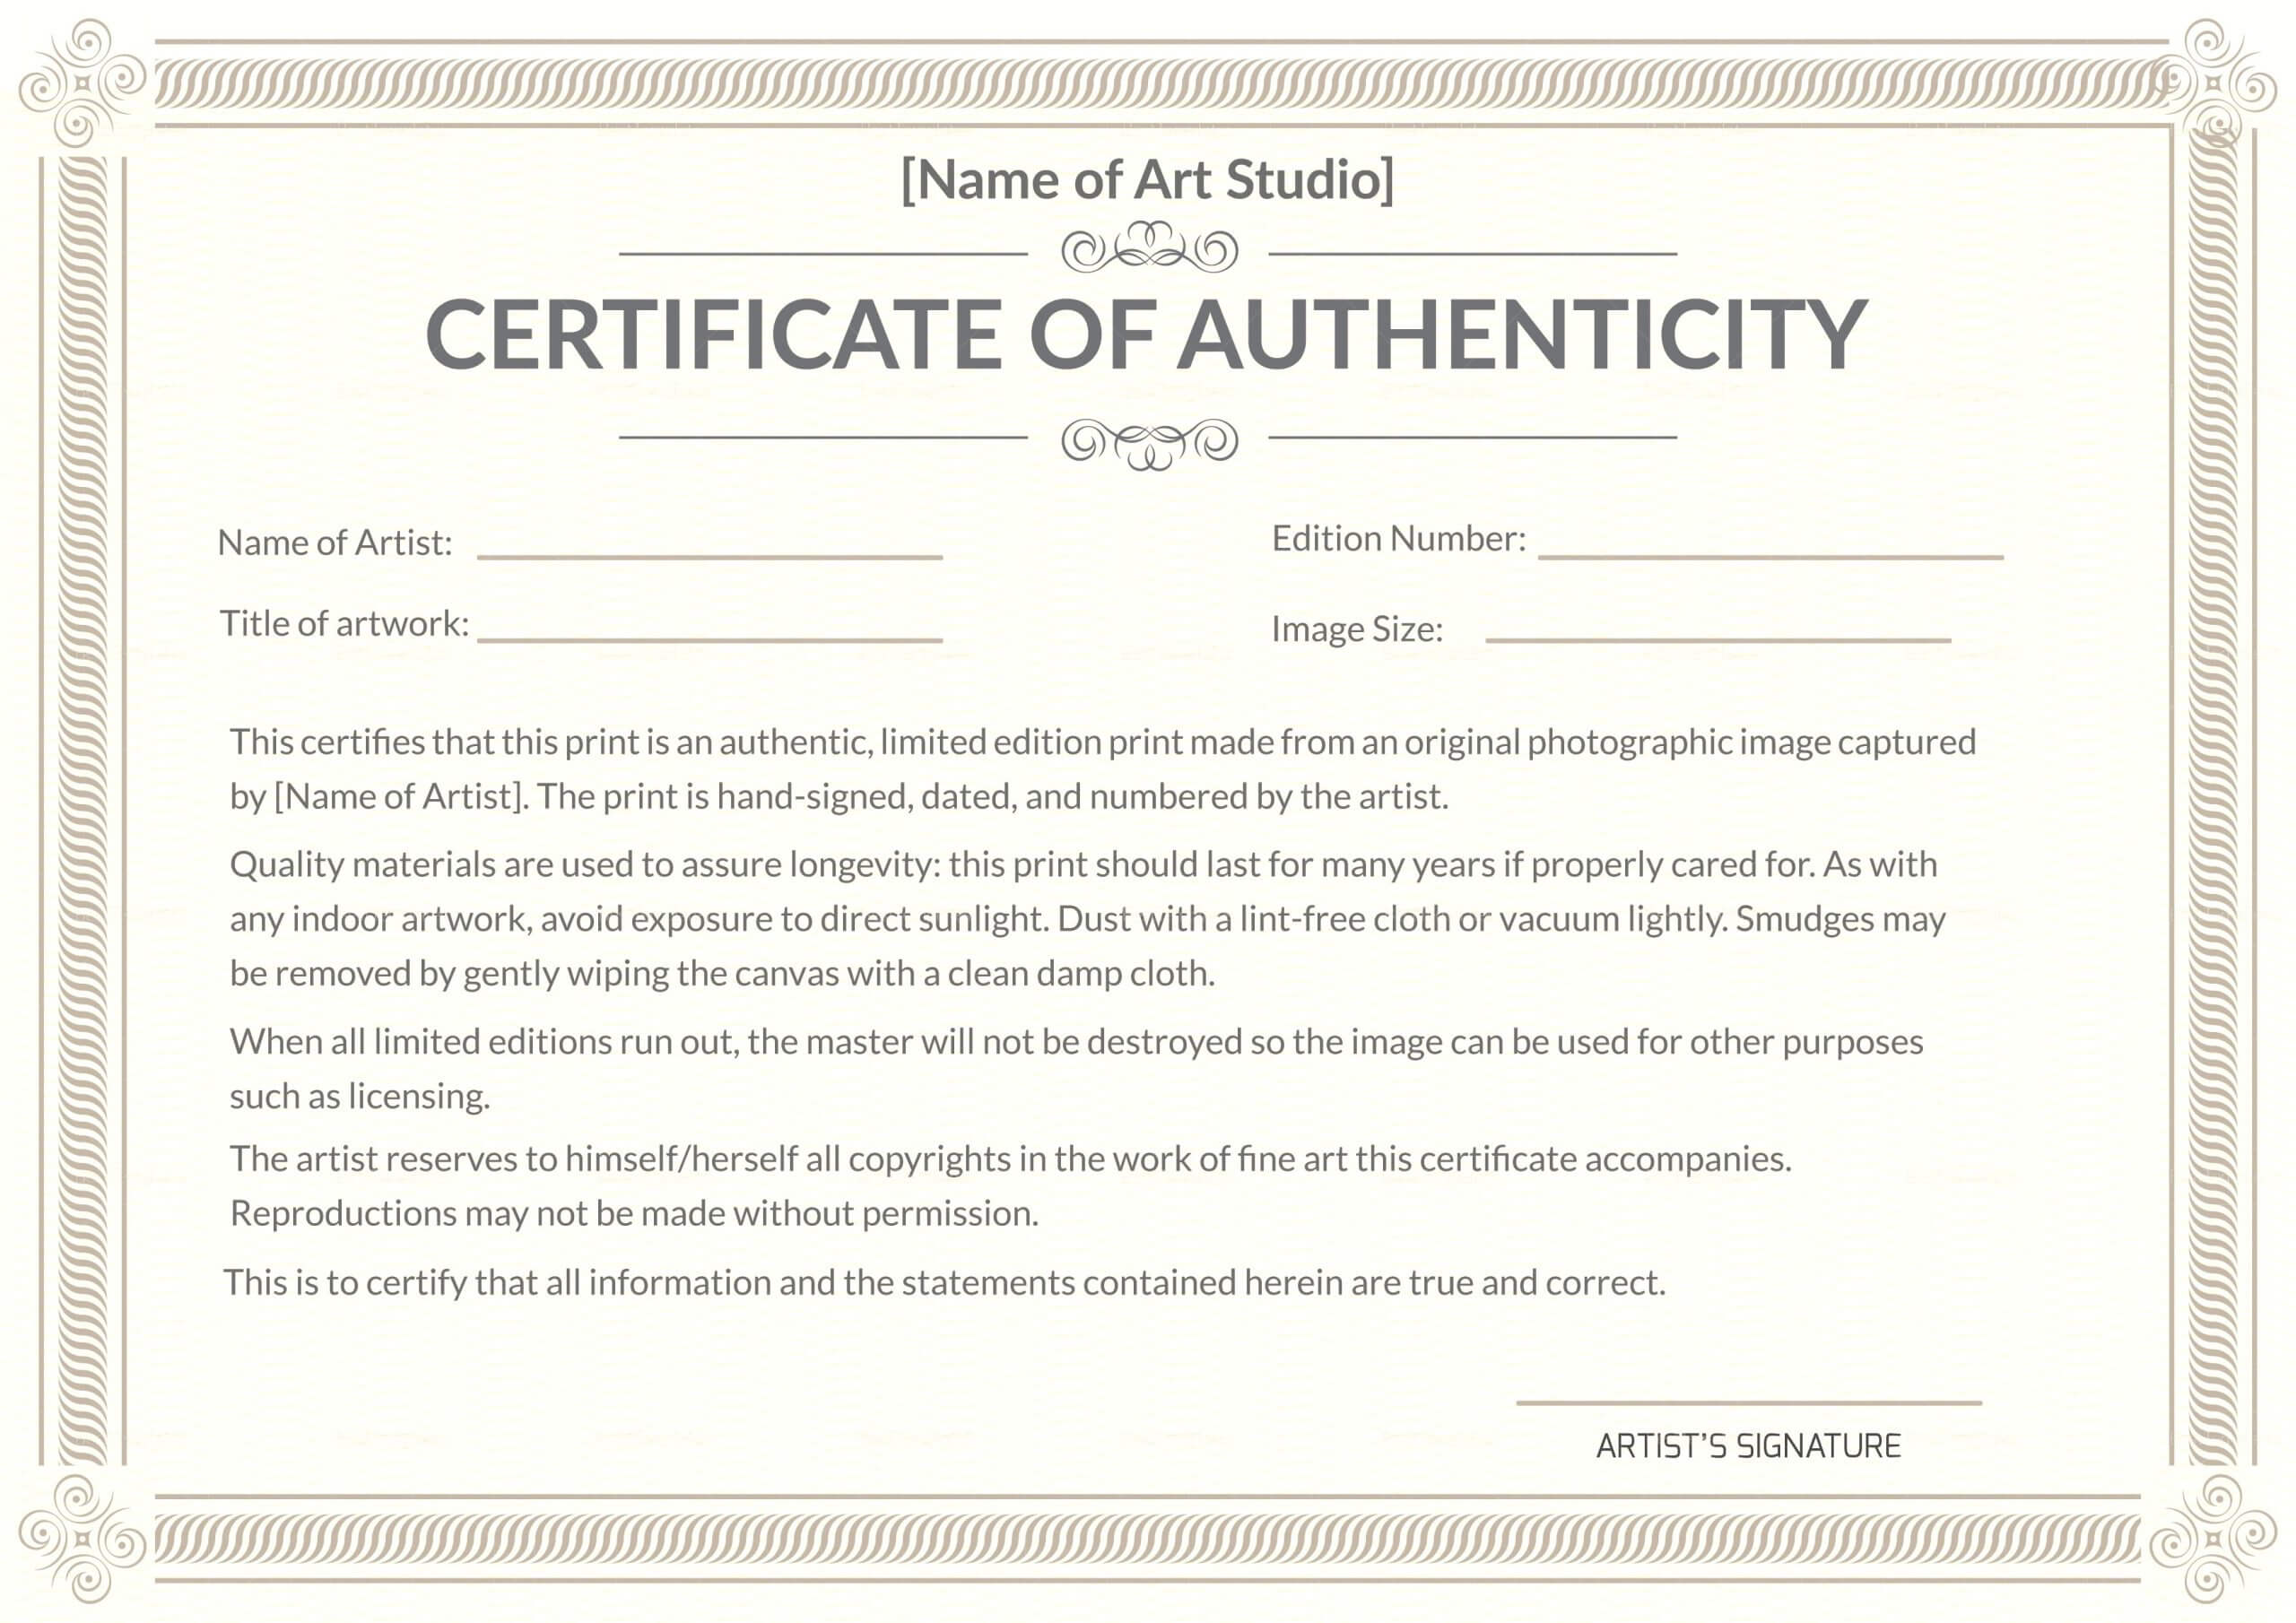 Certificate Of Authenticity Template Photoshop Fine Art Free With Regard To Photography Certificate Of Authenticity Template